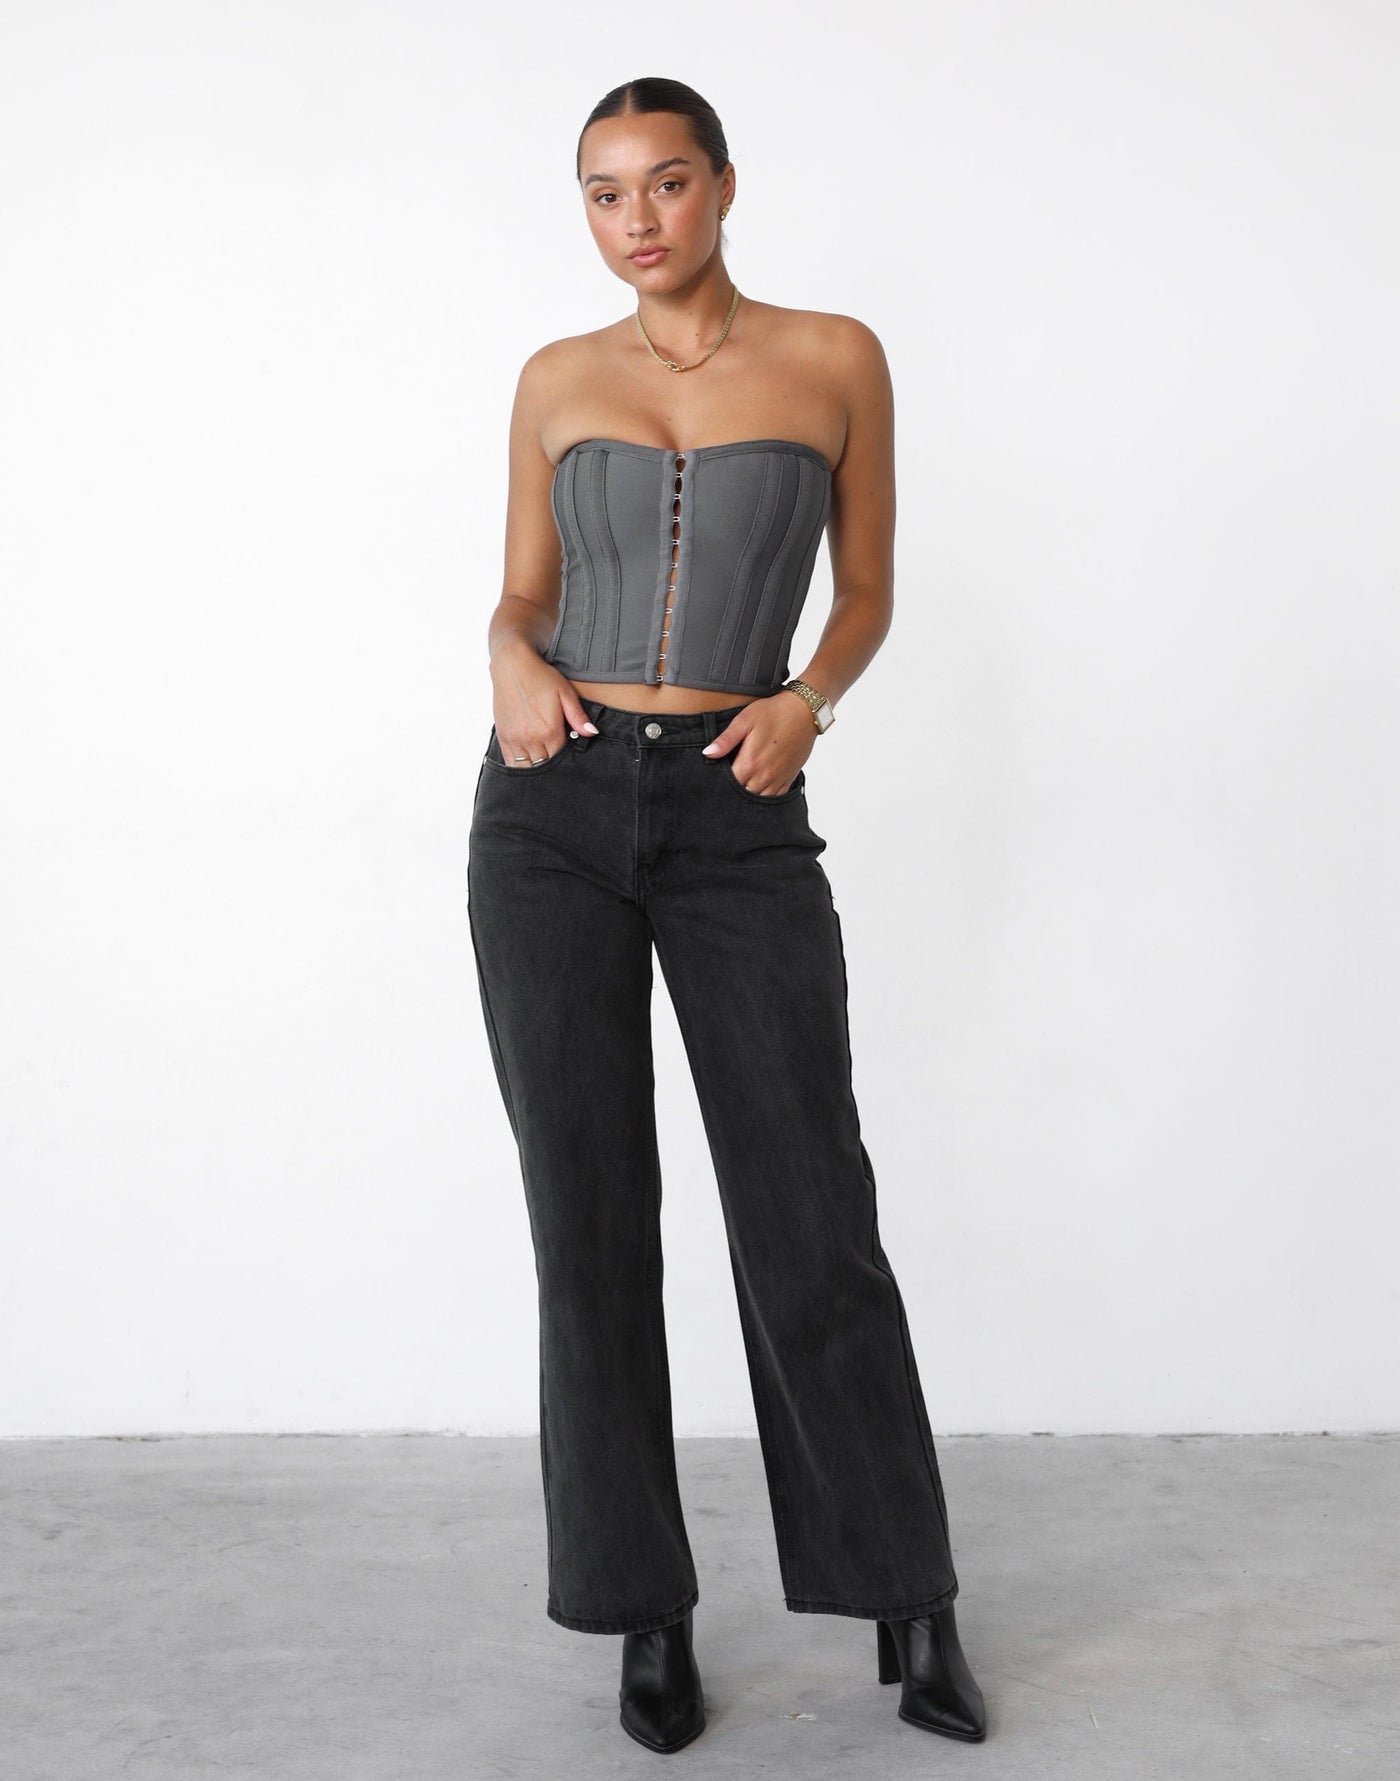 Passion Corset Top (Slate) - Cropped Fitted Corset Top - Women's Top - Charcoal Clothing